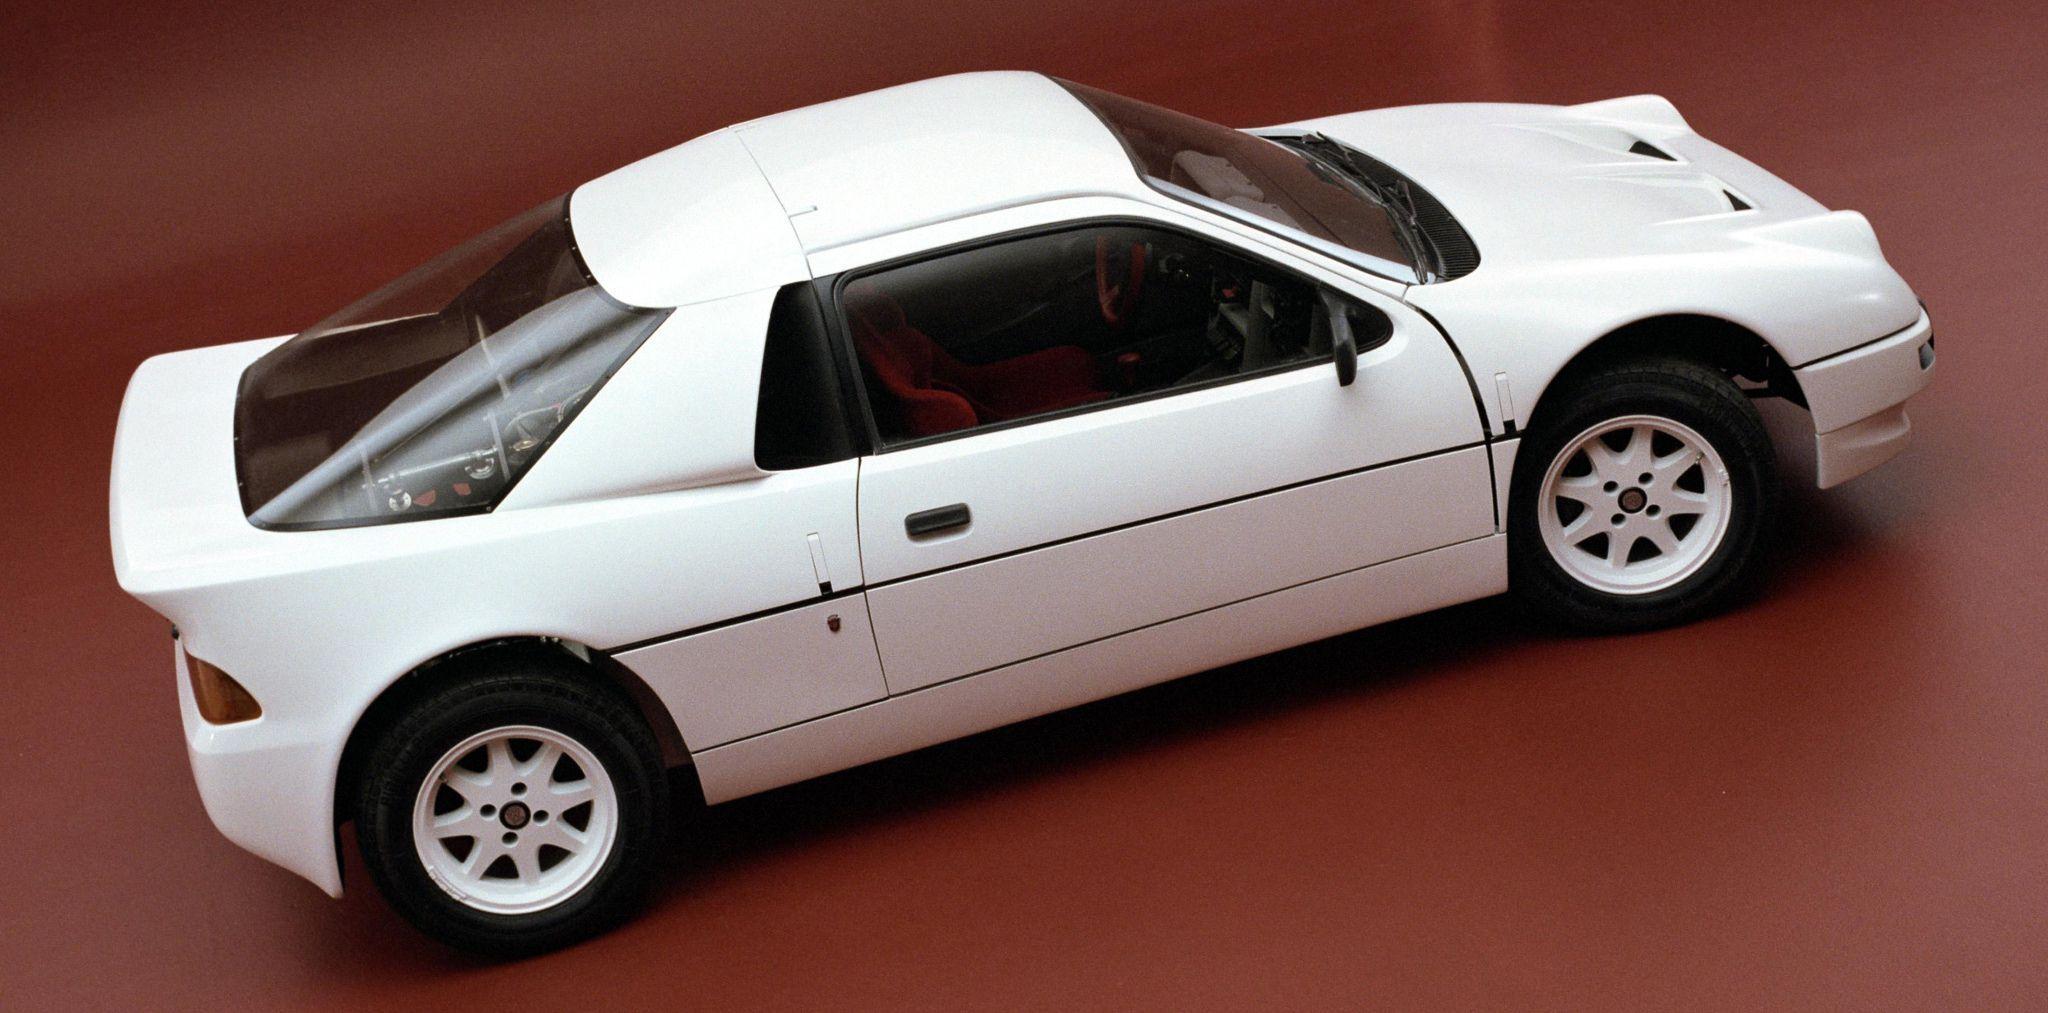 The Ford RS200 is The Wildest Car To Wear a Ford Badge